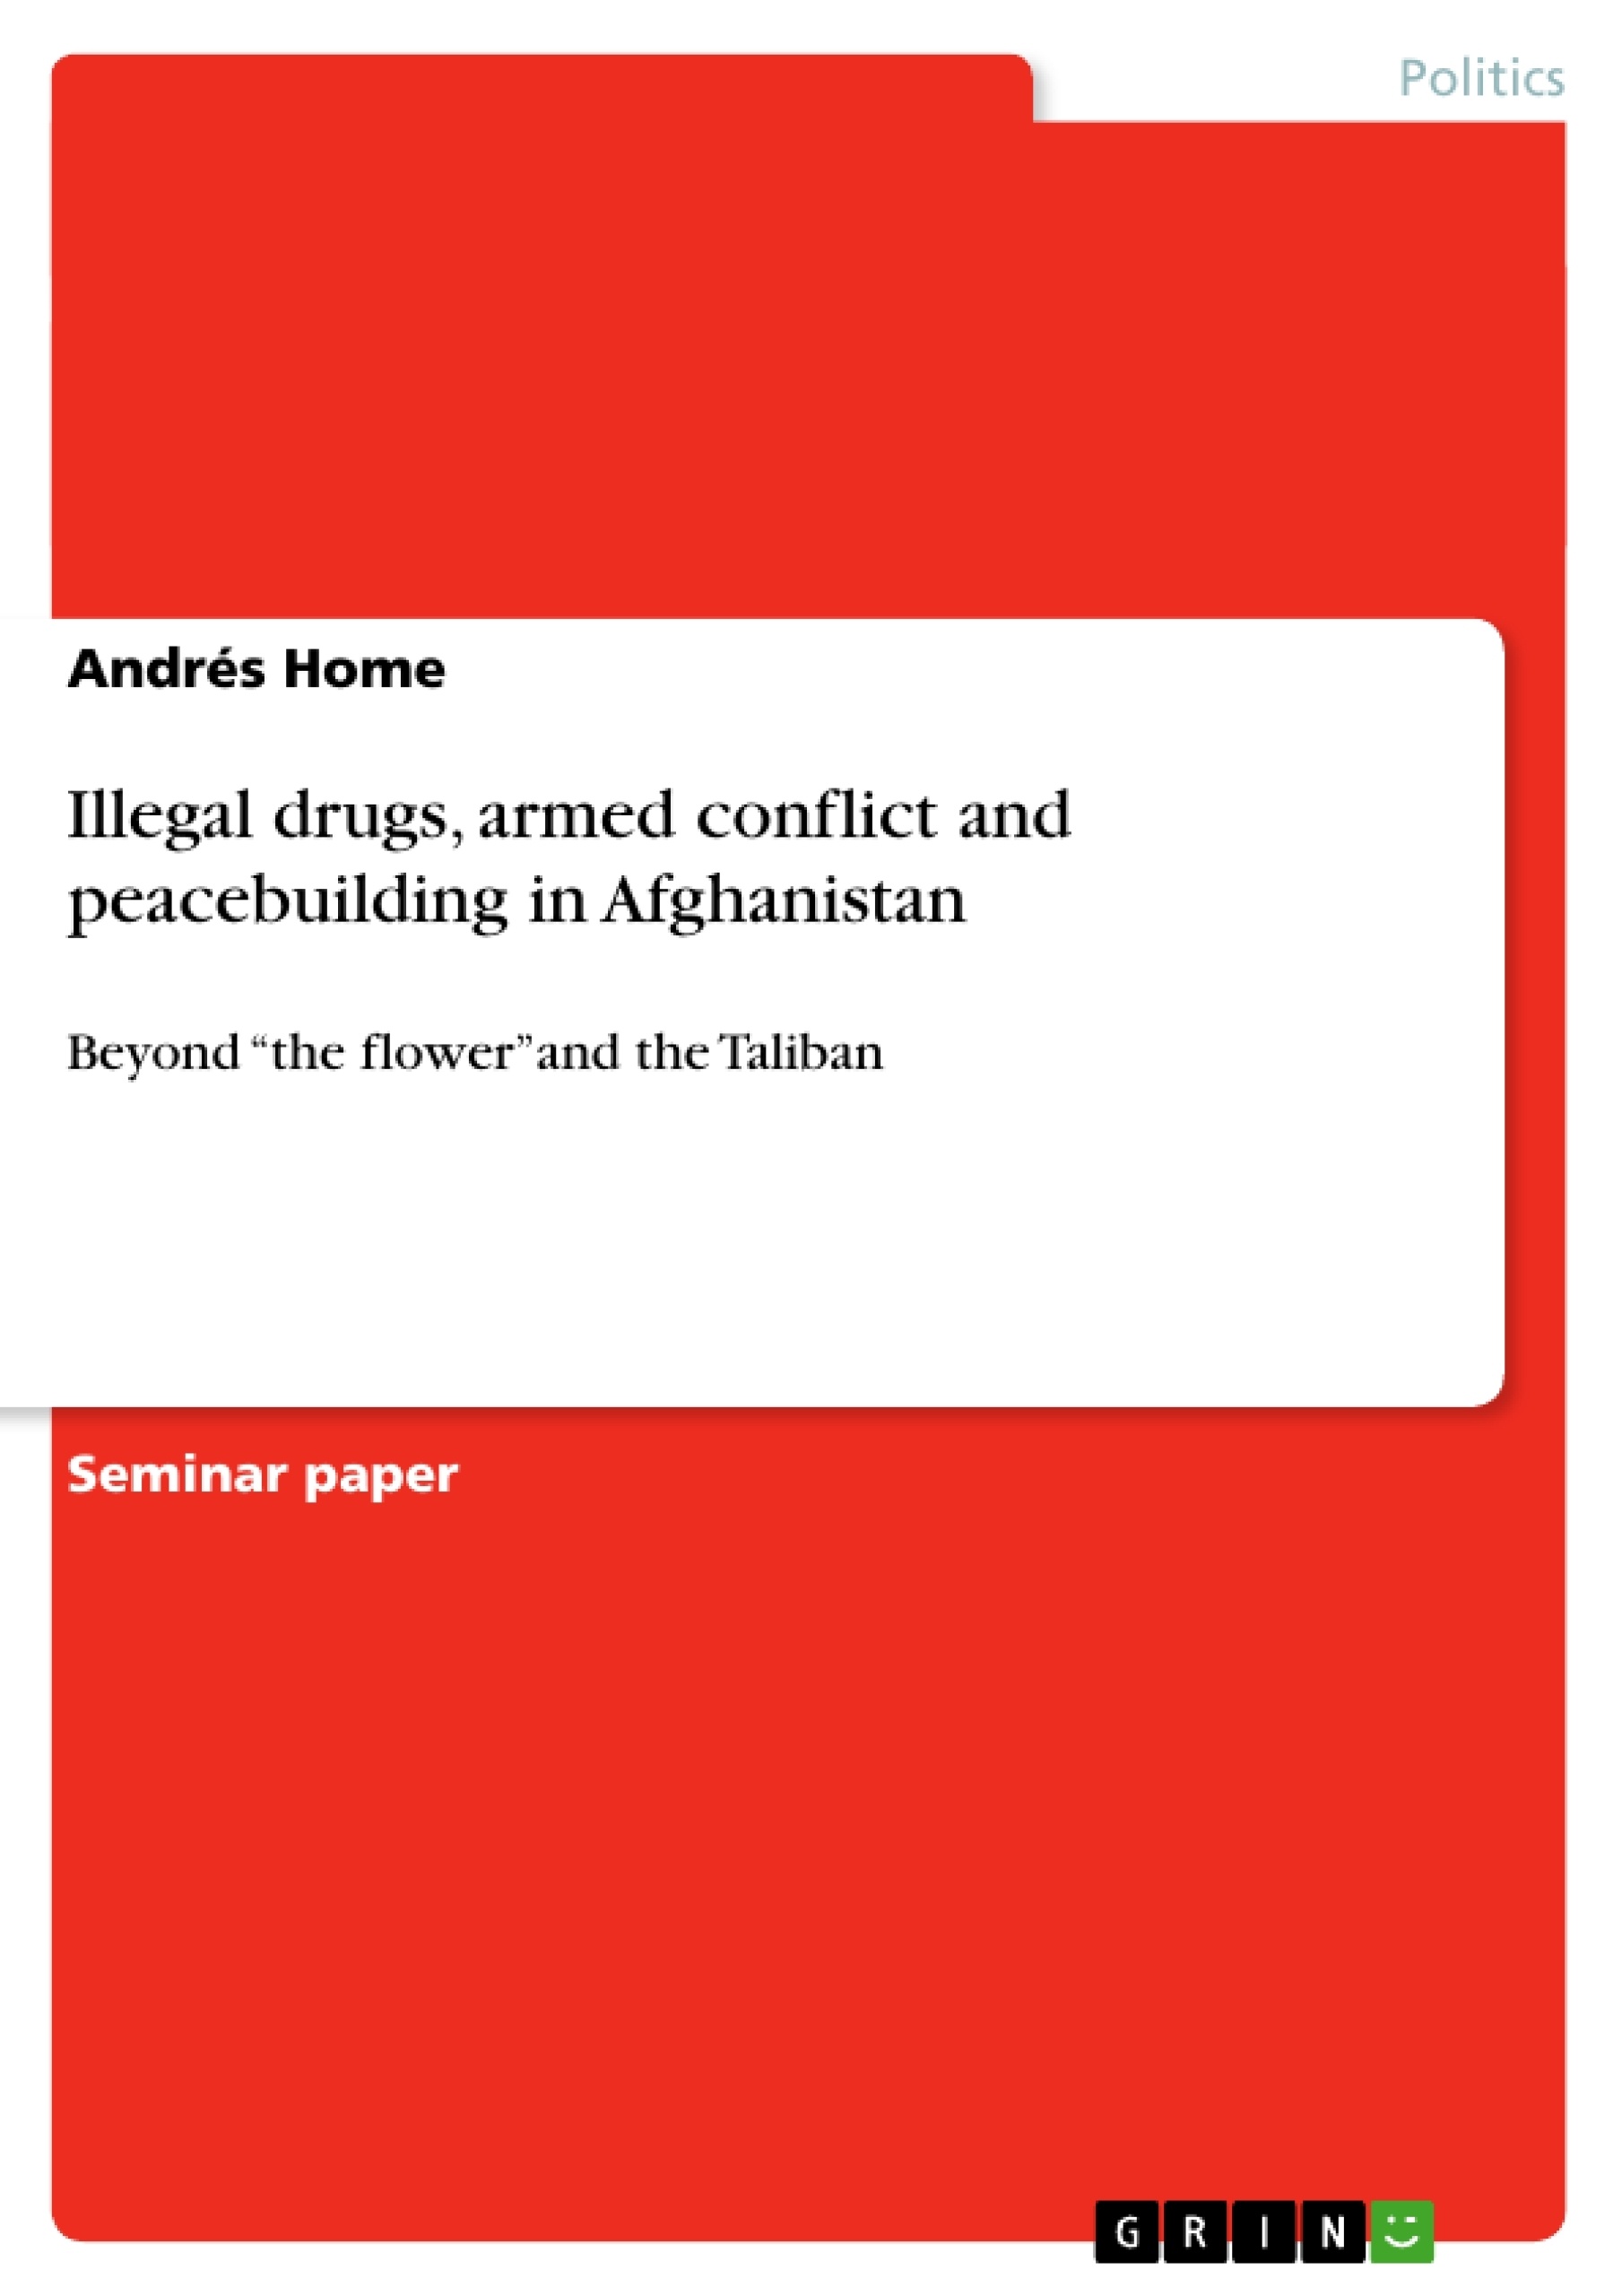 Título: Illegal drugs, armed conflict and peacebuilding in Afghanistan